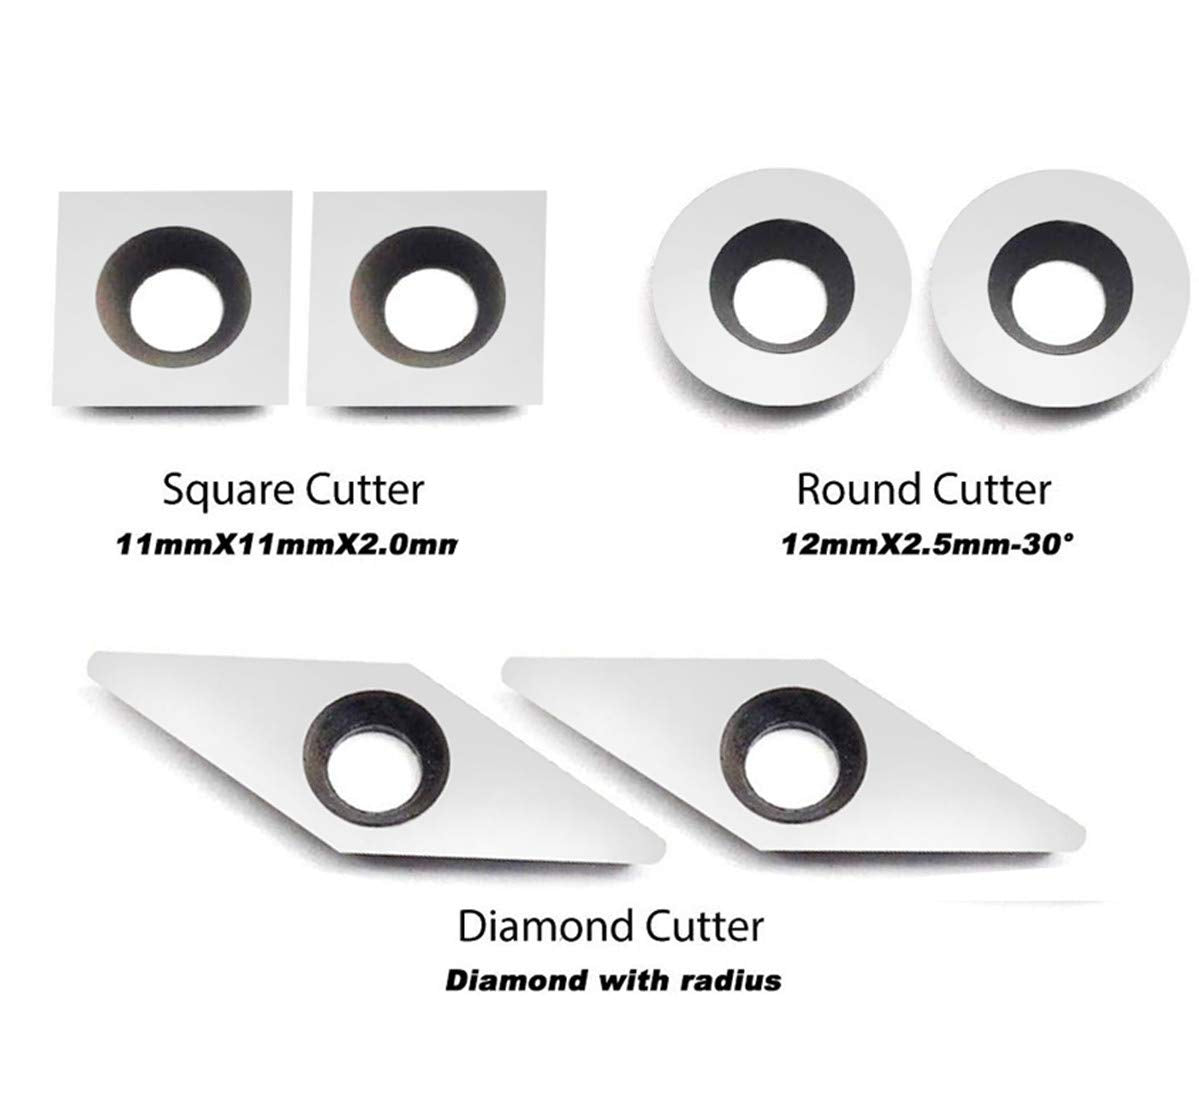 YUFUTOL Carbide Woodturning Tool Mini Size (3 Piece Set) Includes Diamond Shape, Round and Square Turning Tools With Comfort Grip Handles Perfect For